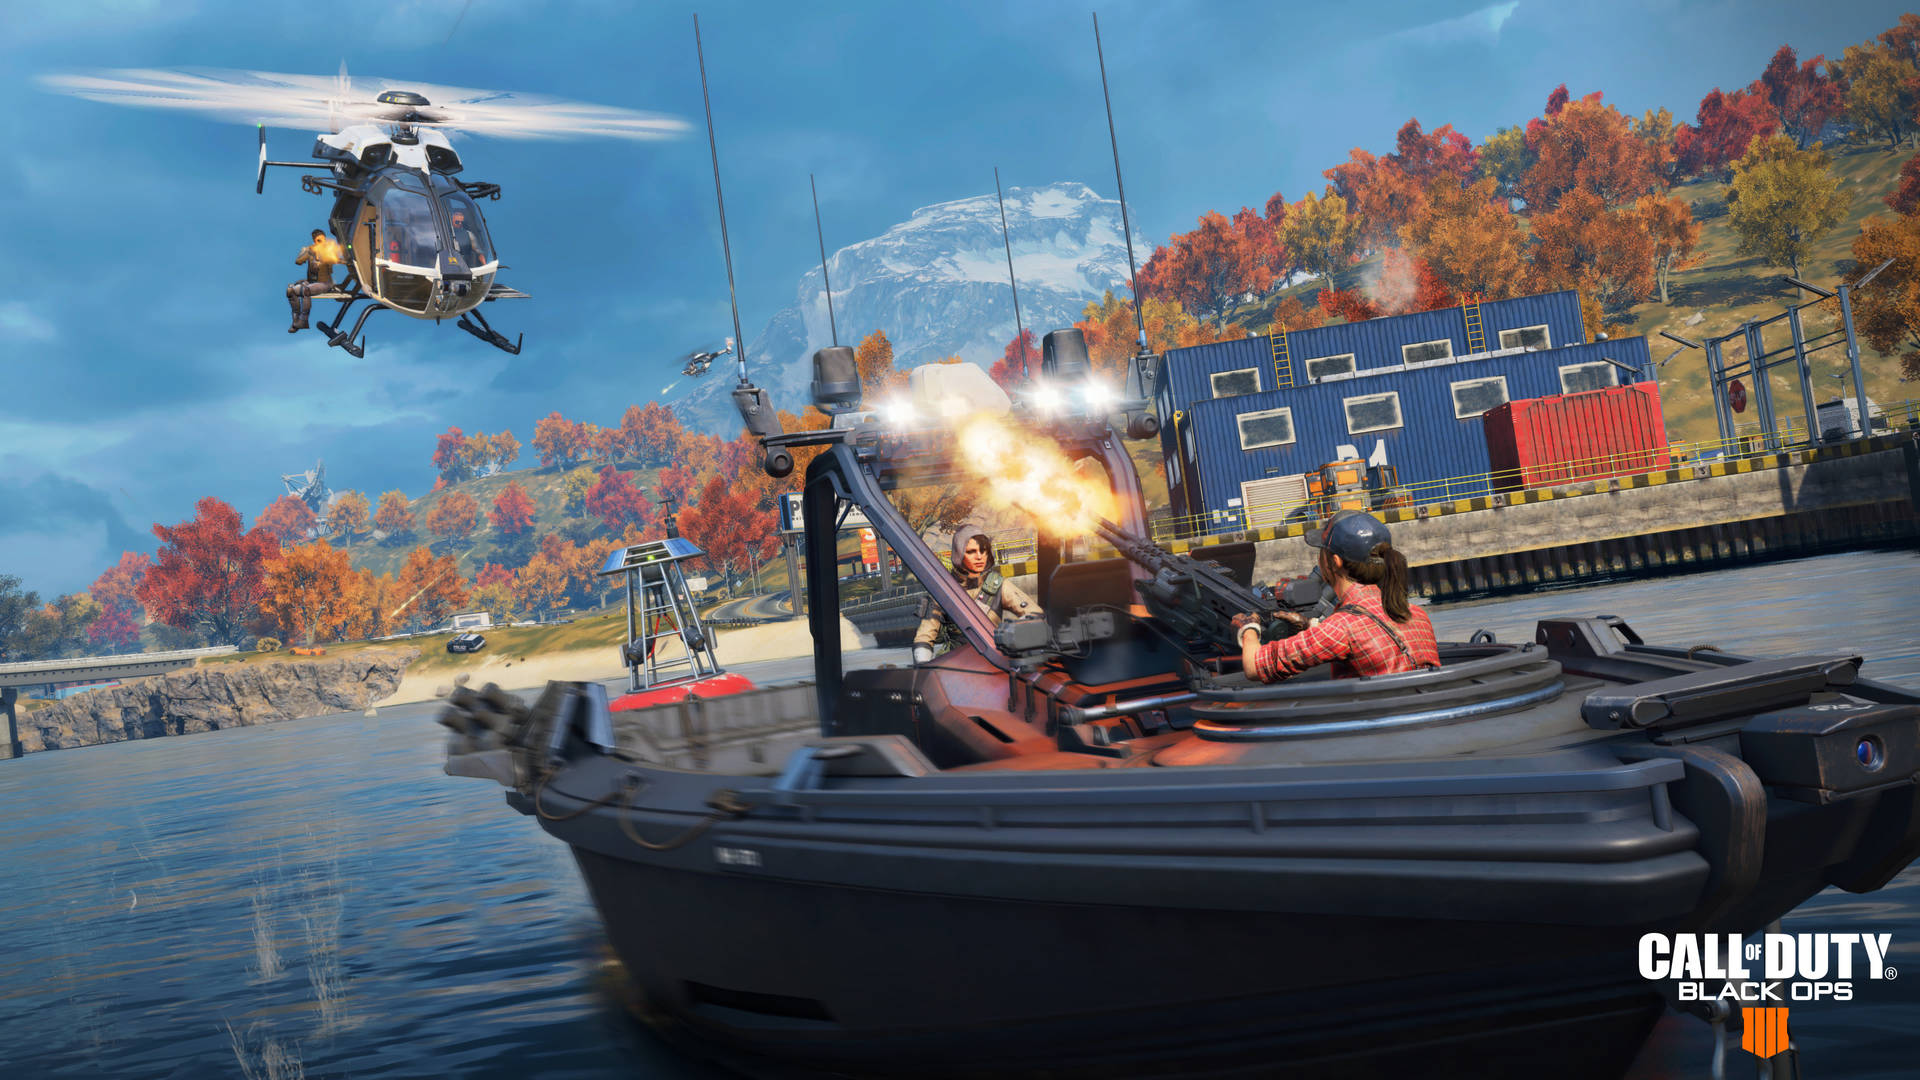 Cod Black Ops 4 Helicopter-boat Chase Wallpaper